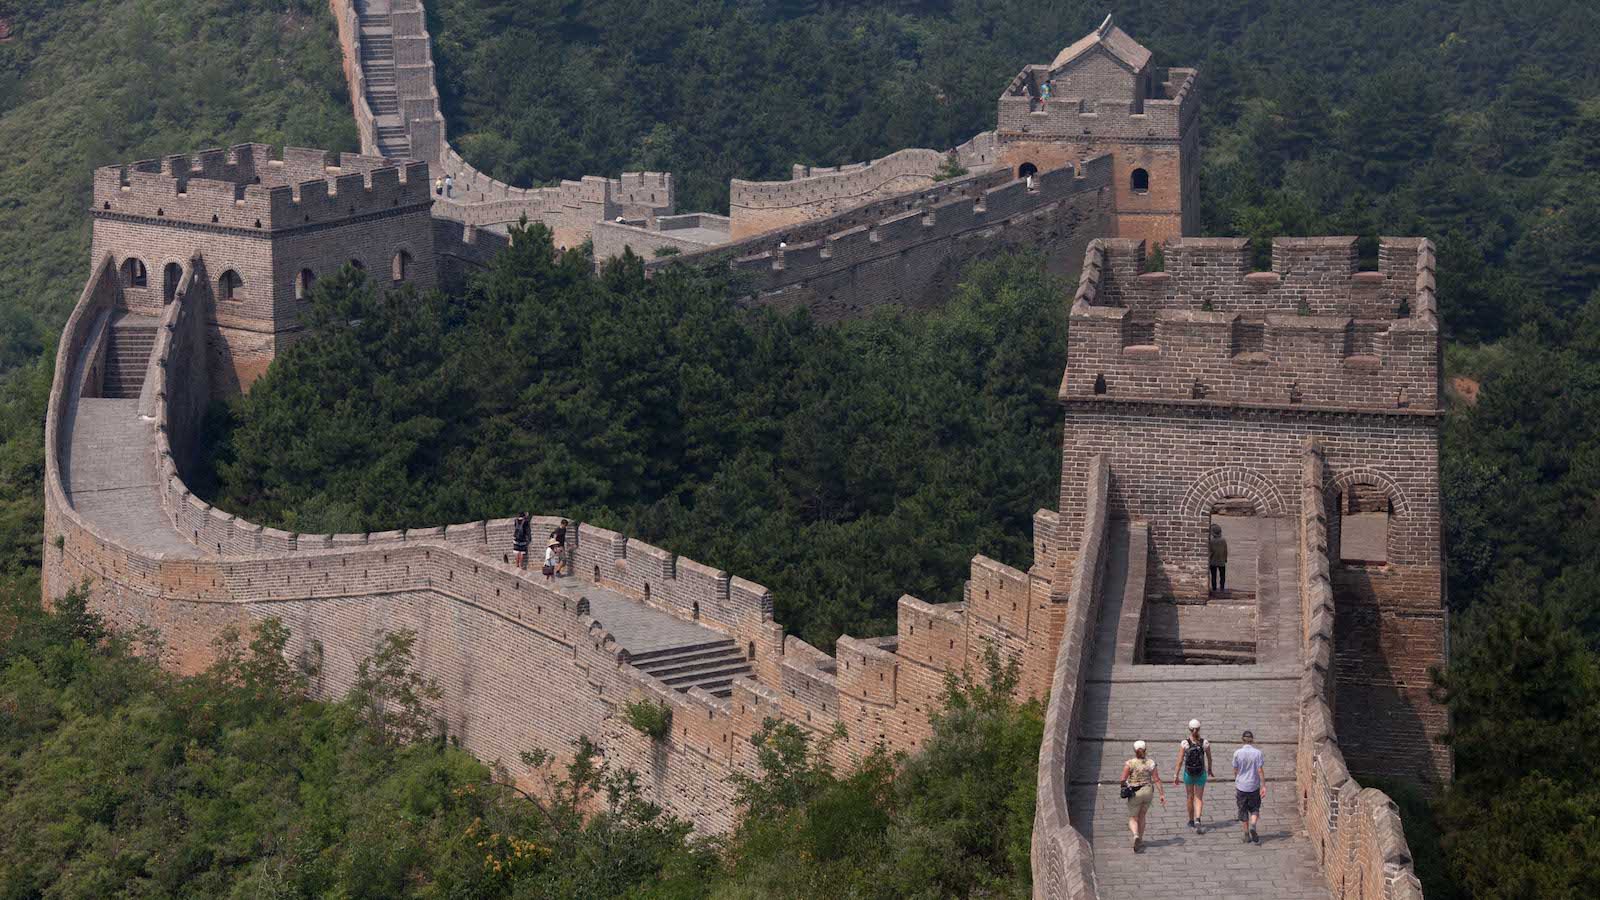 Spotting Great Wall from space IS possible